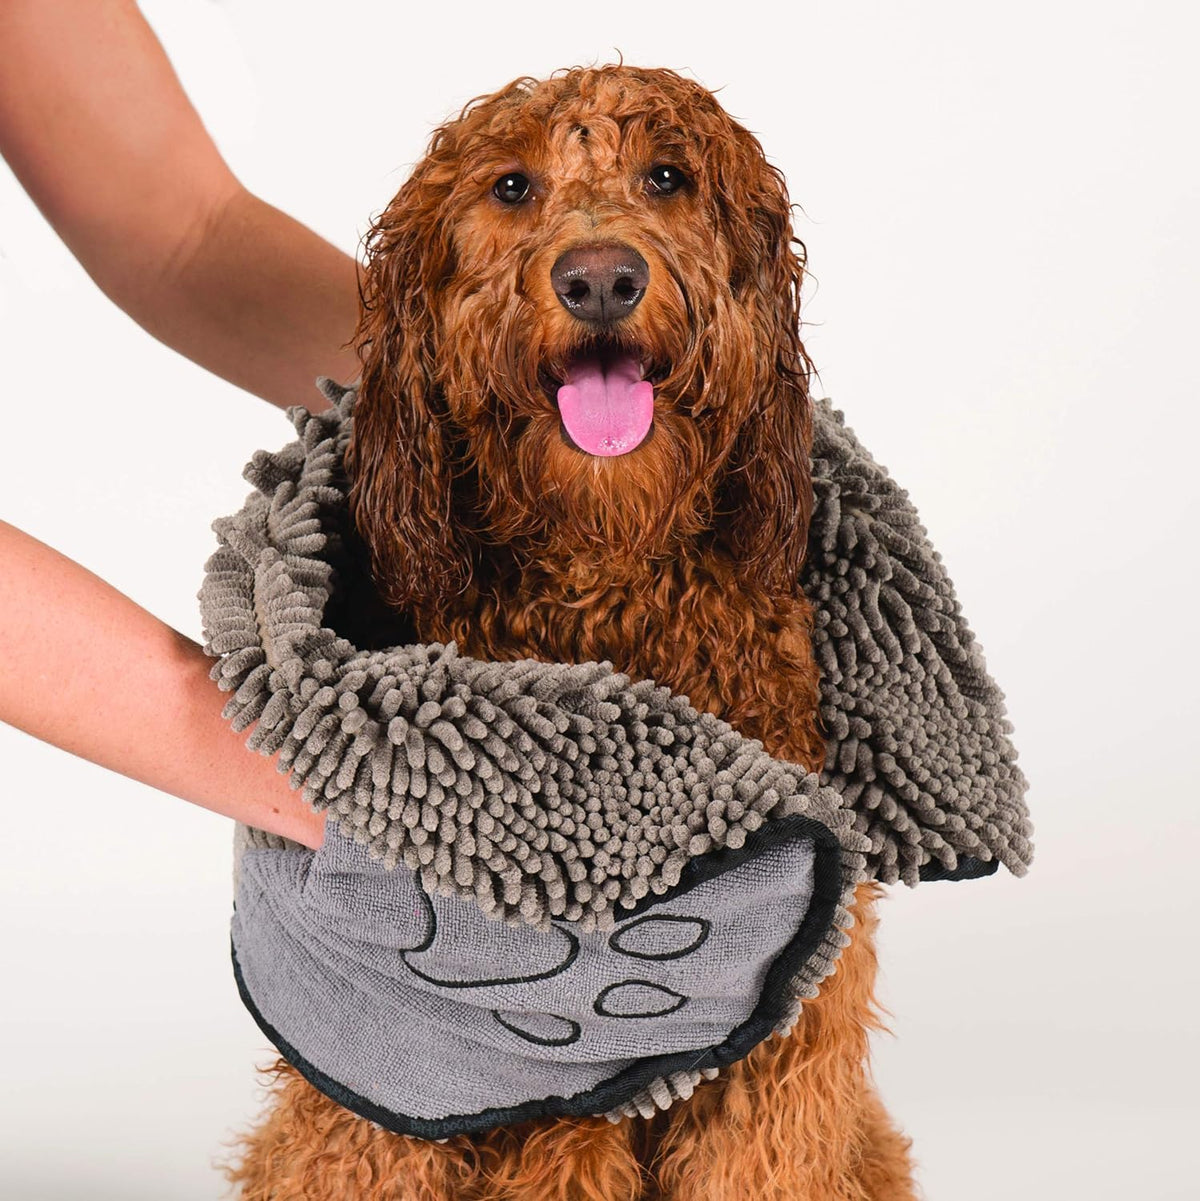 Shammy Dog Towels for Drying Dogs - Heavy Duty Soft Microfiber Bath To
AMAZING MICROFIBER SHAMMY: Made from the same material as our popular door mats, these shammies are made of super soft, incredibly absorbent, quick drying microfibeDrying Dogs - Heavy Duty Soft Microfiber Bath Towel - Super Absorbent, Quick Drying, & Machine Washable -